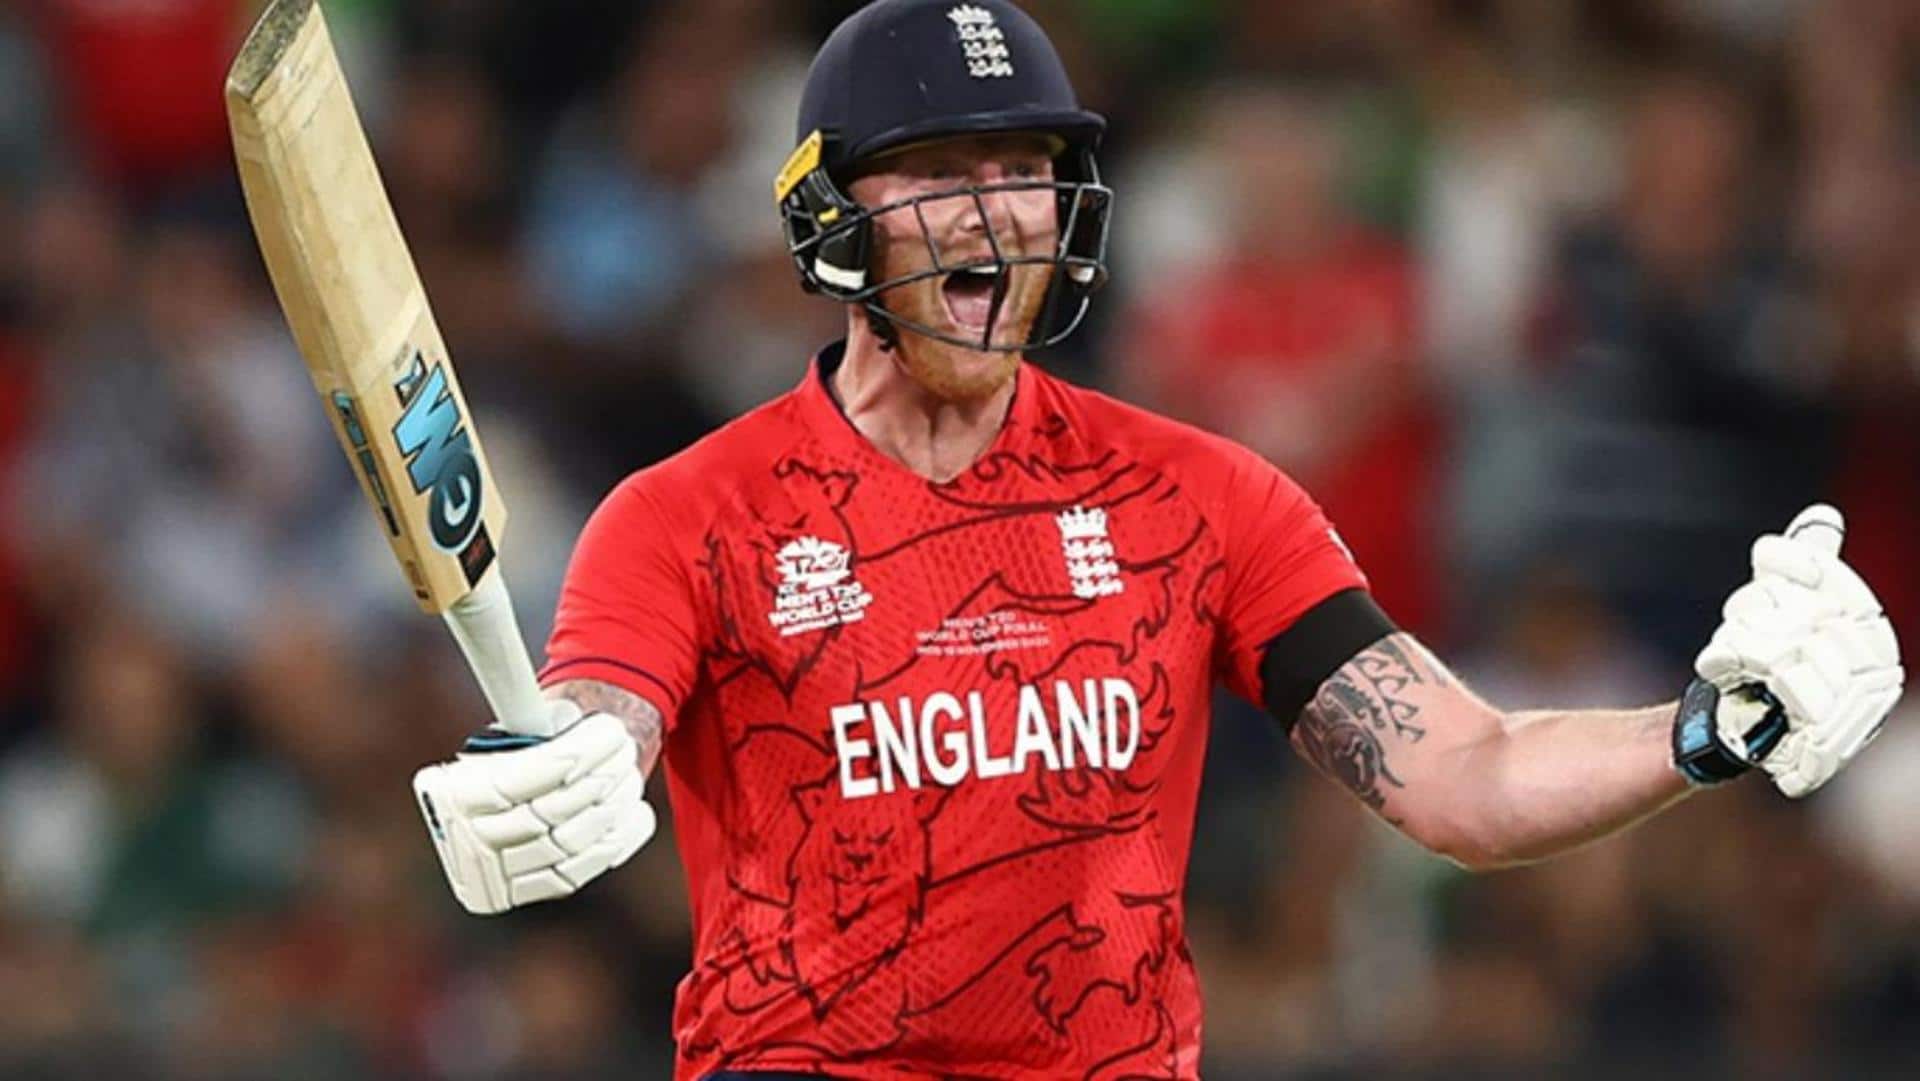 How has Ben Stokes fared in ICC events (limited overs)?